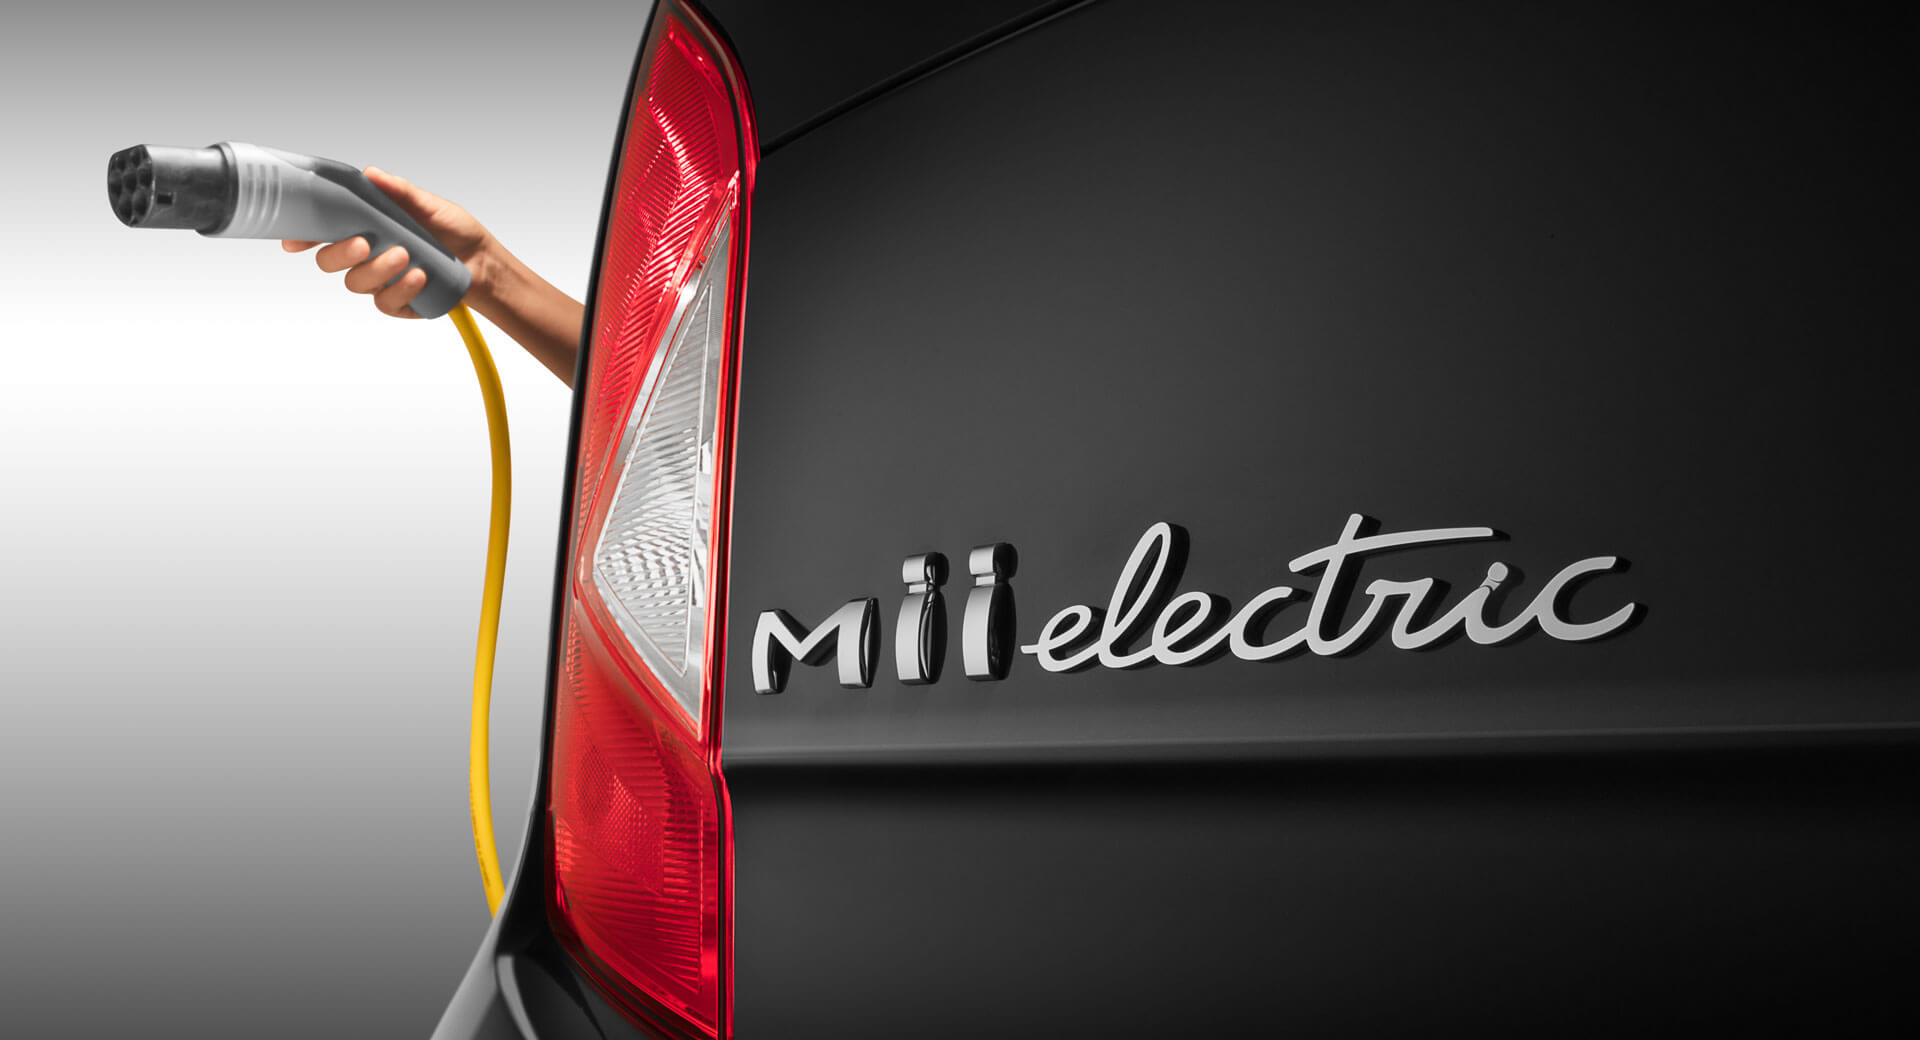 Seat Mii Electric Teased As The Brand's First-Ever EV